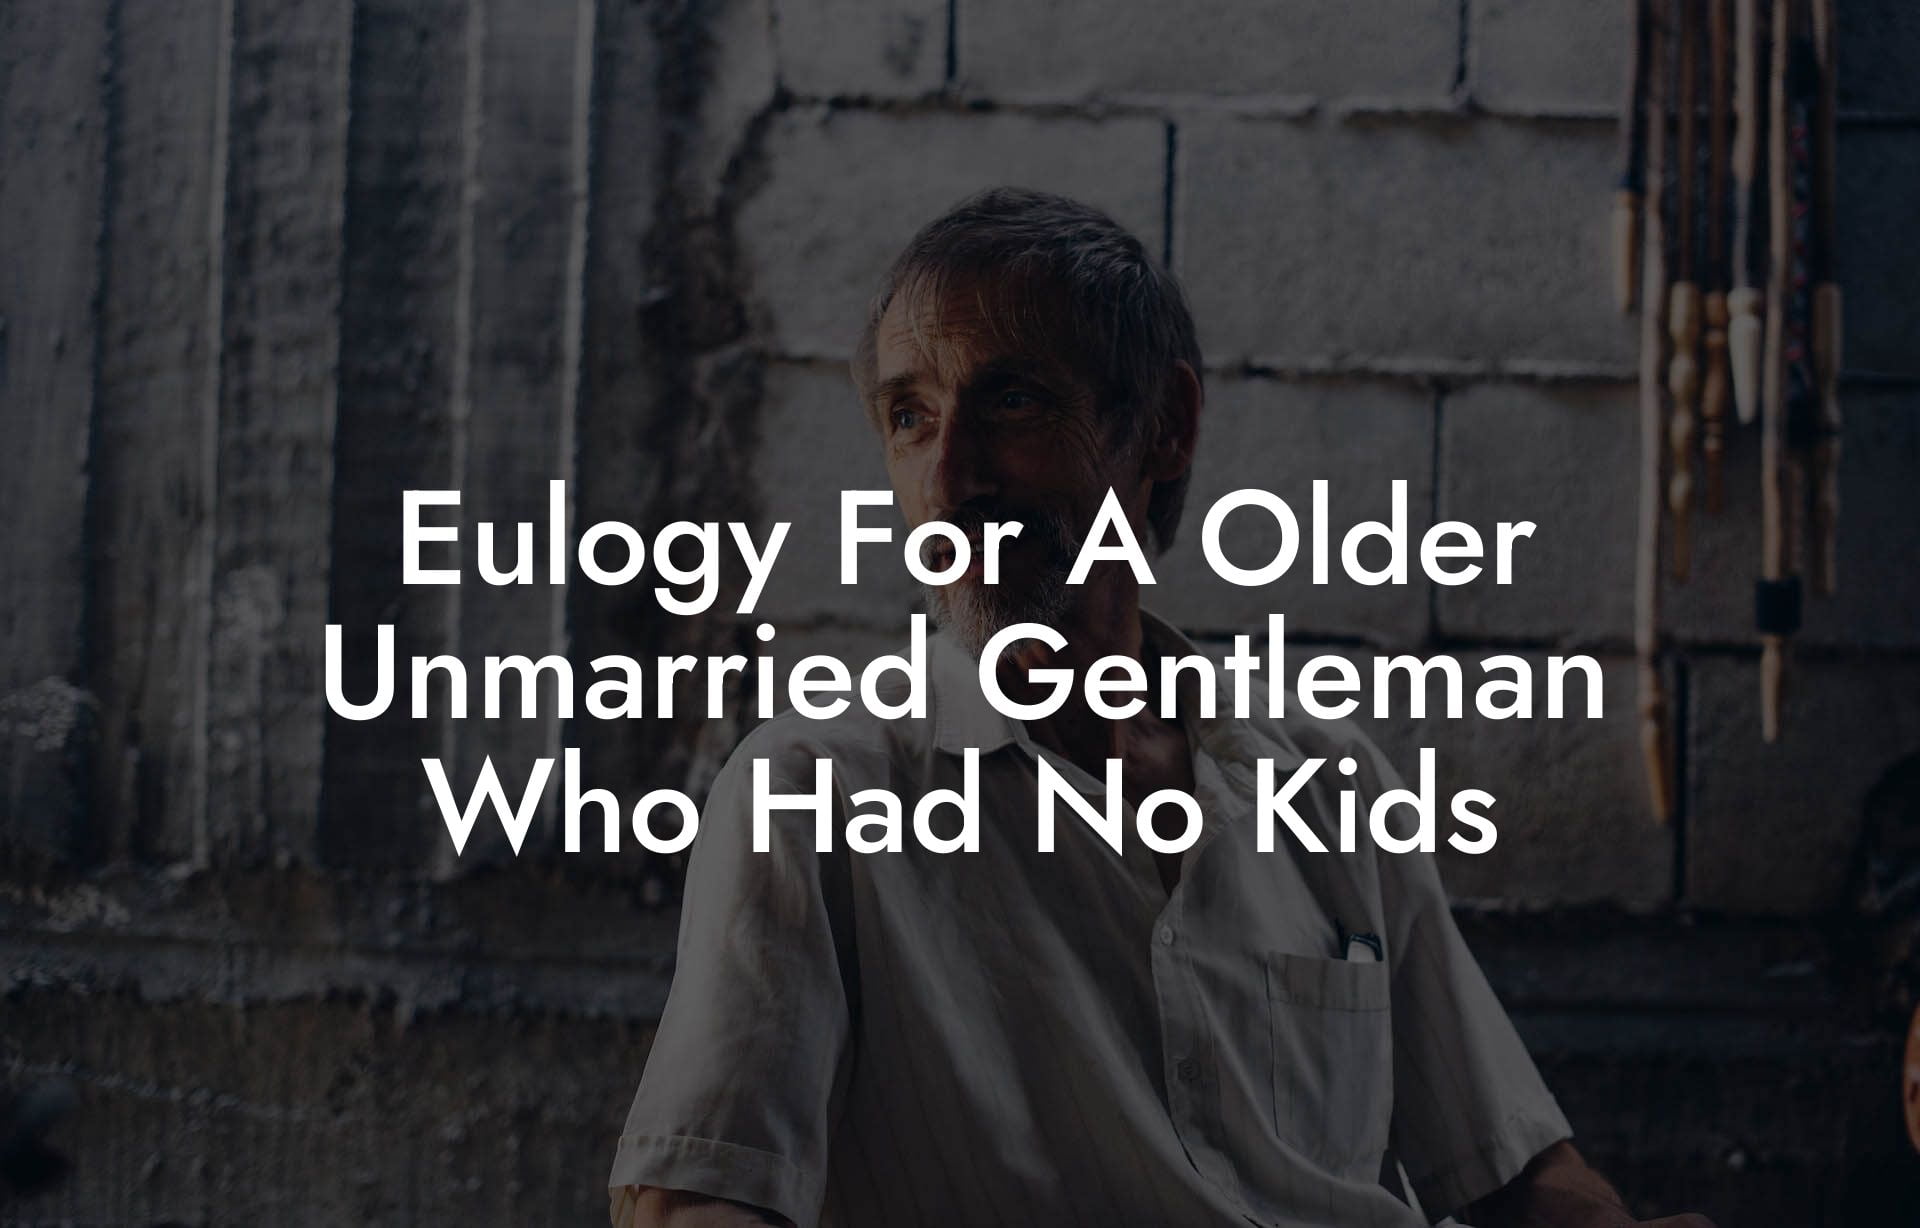 Eulogy For A Older Unmarried Gentleman Who Had No Kids